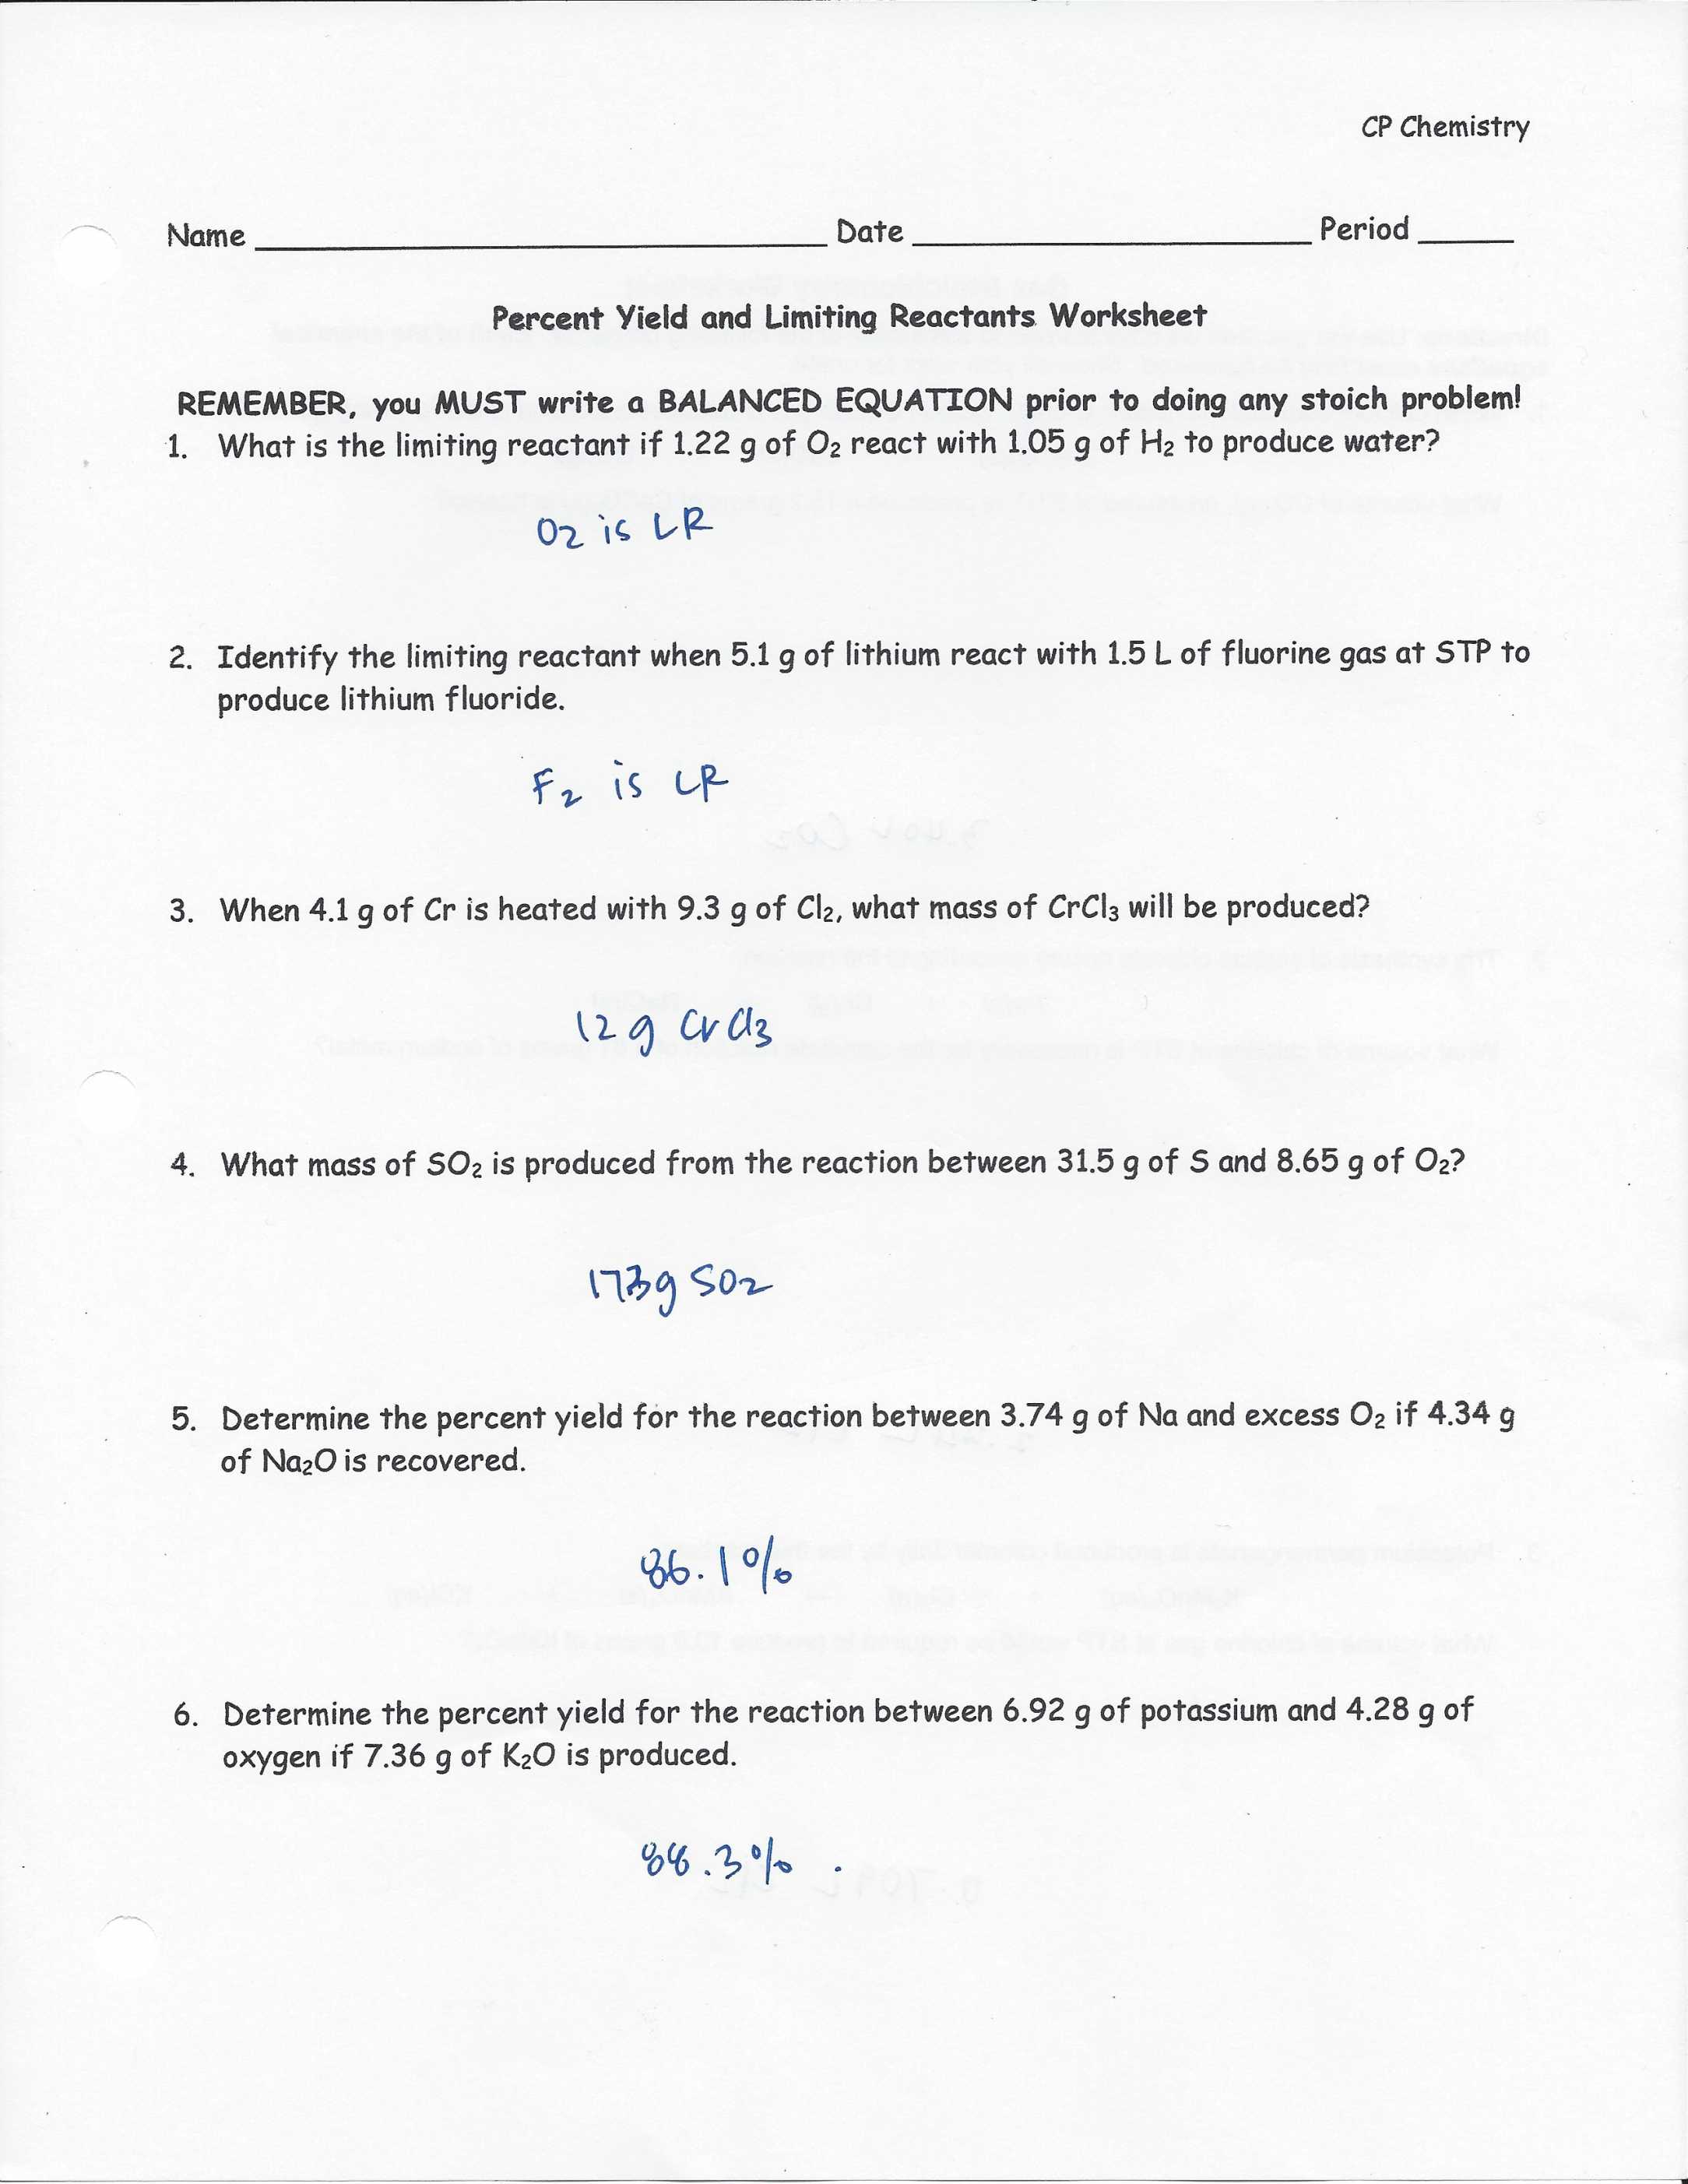 Gas Stoichiometry Worksheet with solutions together with Worksheet Limiting Reactant and Percent Yield Worksheet Answer Key